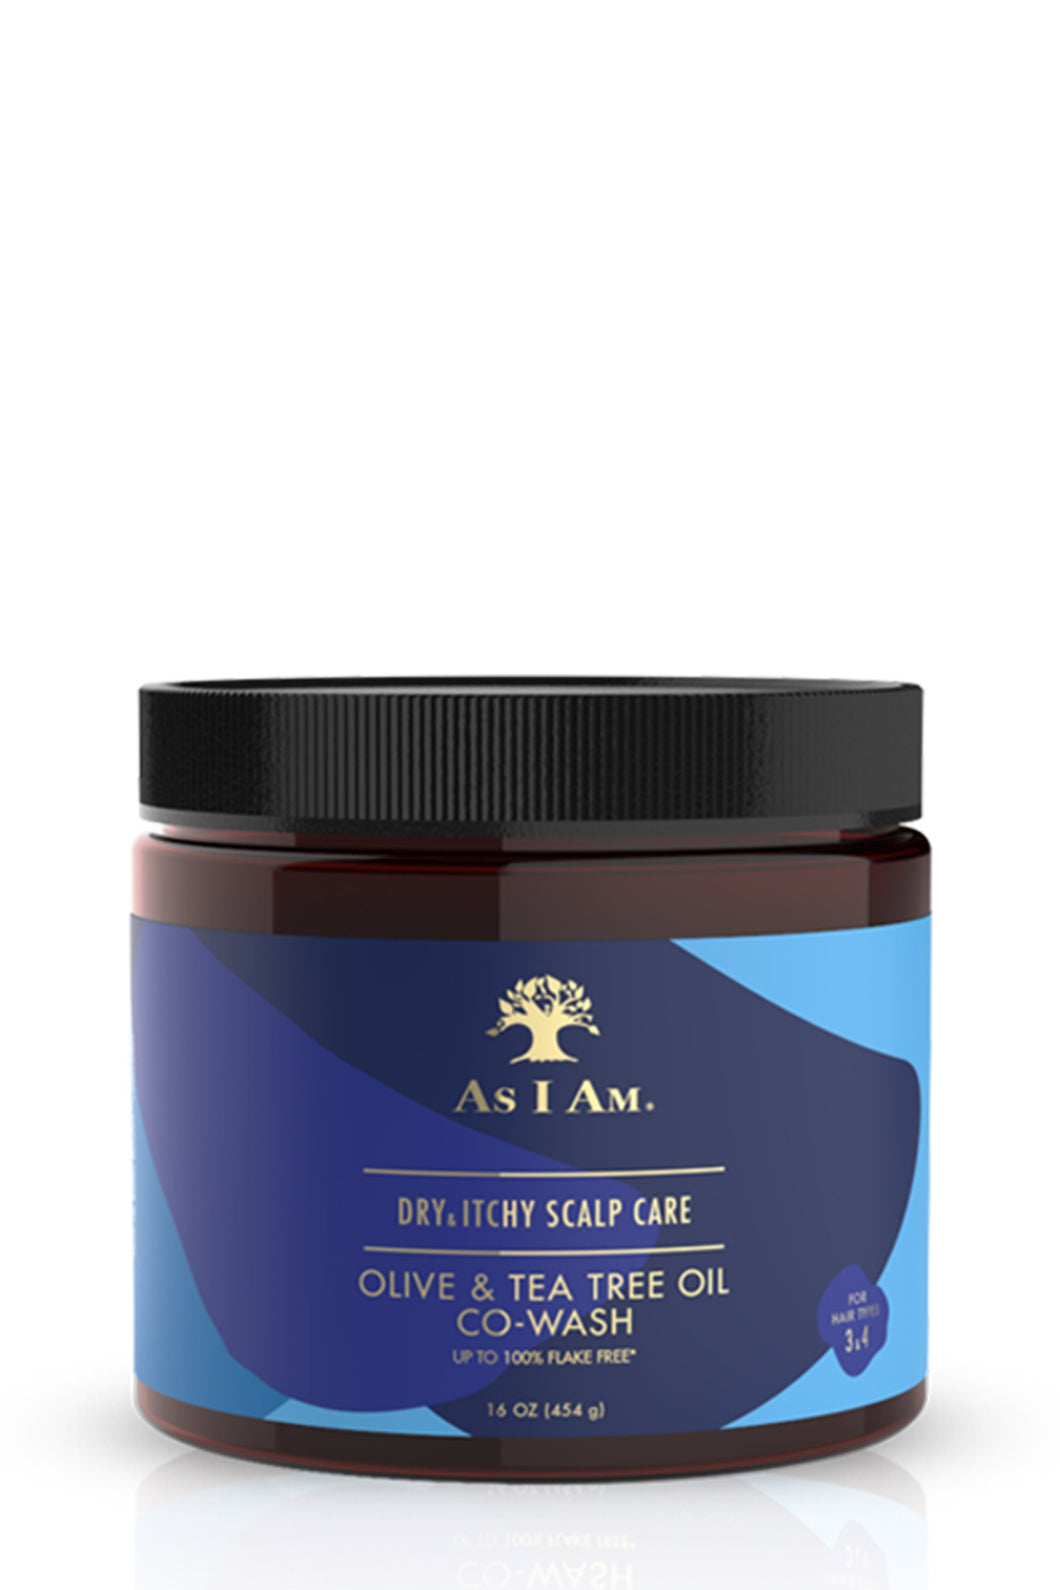 AS I AM Dry and Itchy Scalp Care Olive and Tea Tree Oil Co-Wash Product